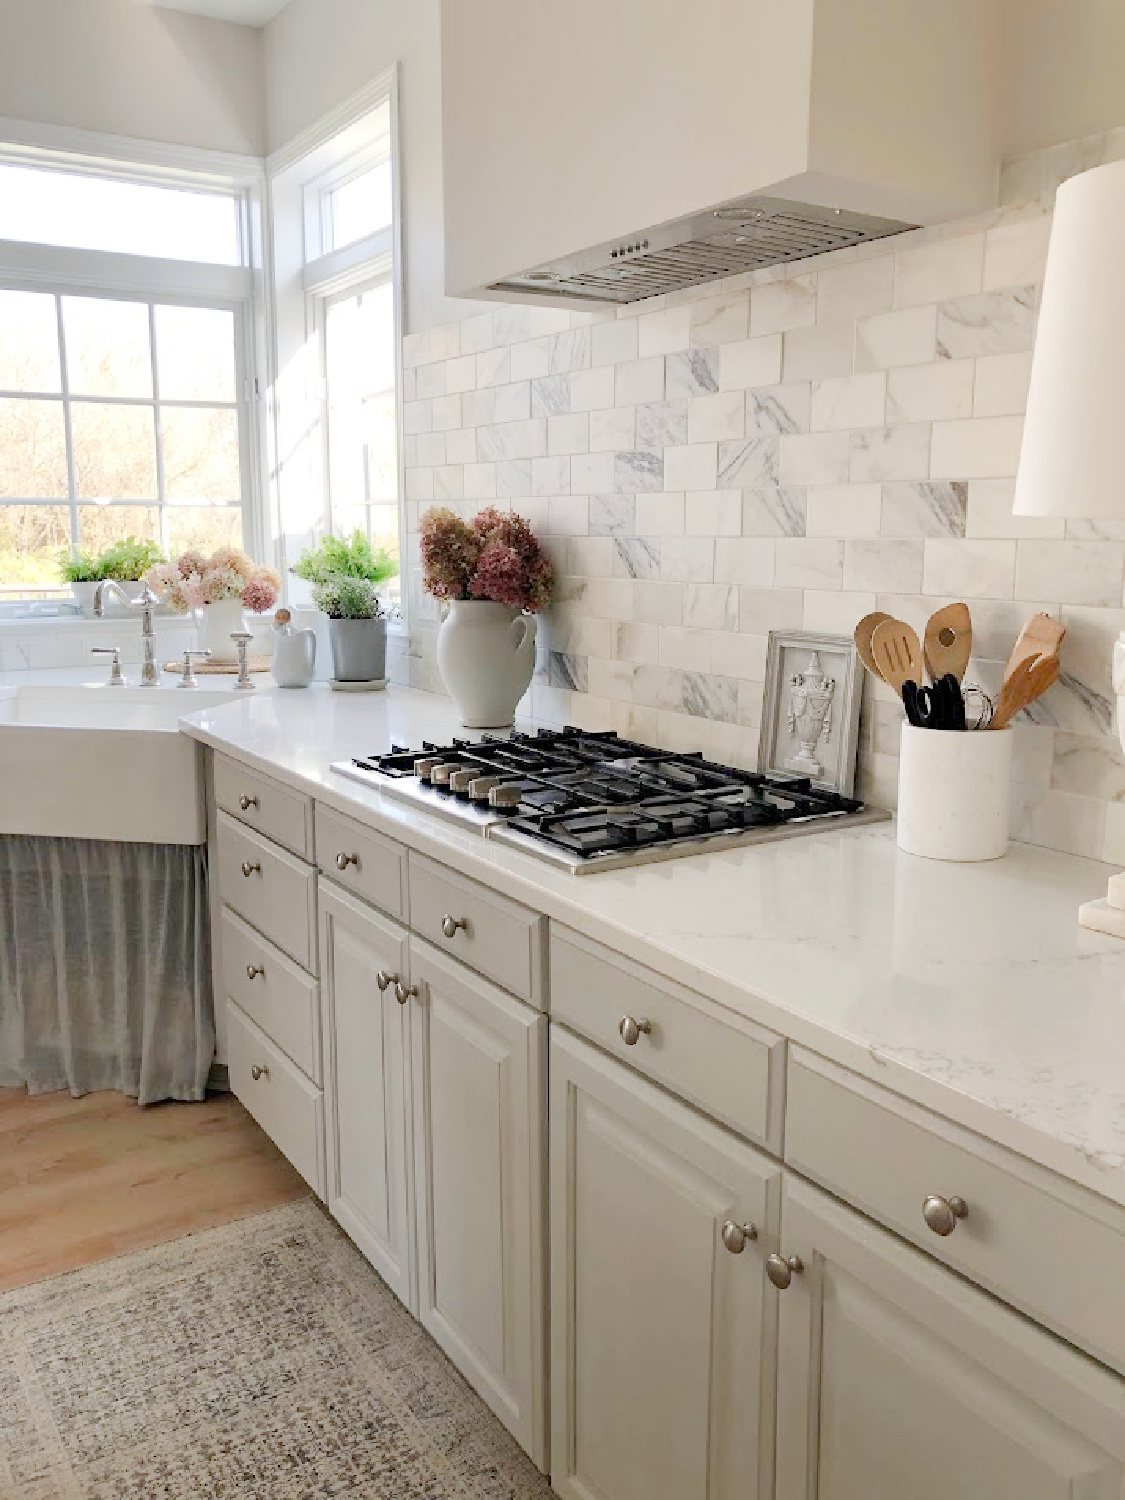 Renovated kitchen with Viatera Muse countertops and Sherwin Williams Eider White paint color. Cabinets are 50% Farrow & Ball Pavilion Gray - Hello Lovely Studio.